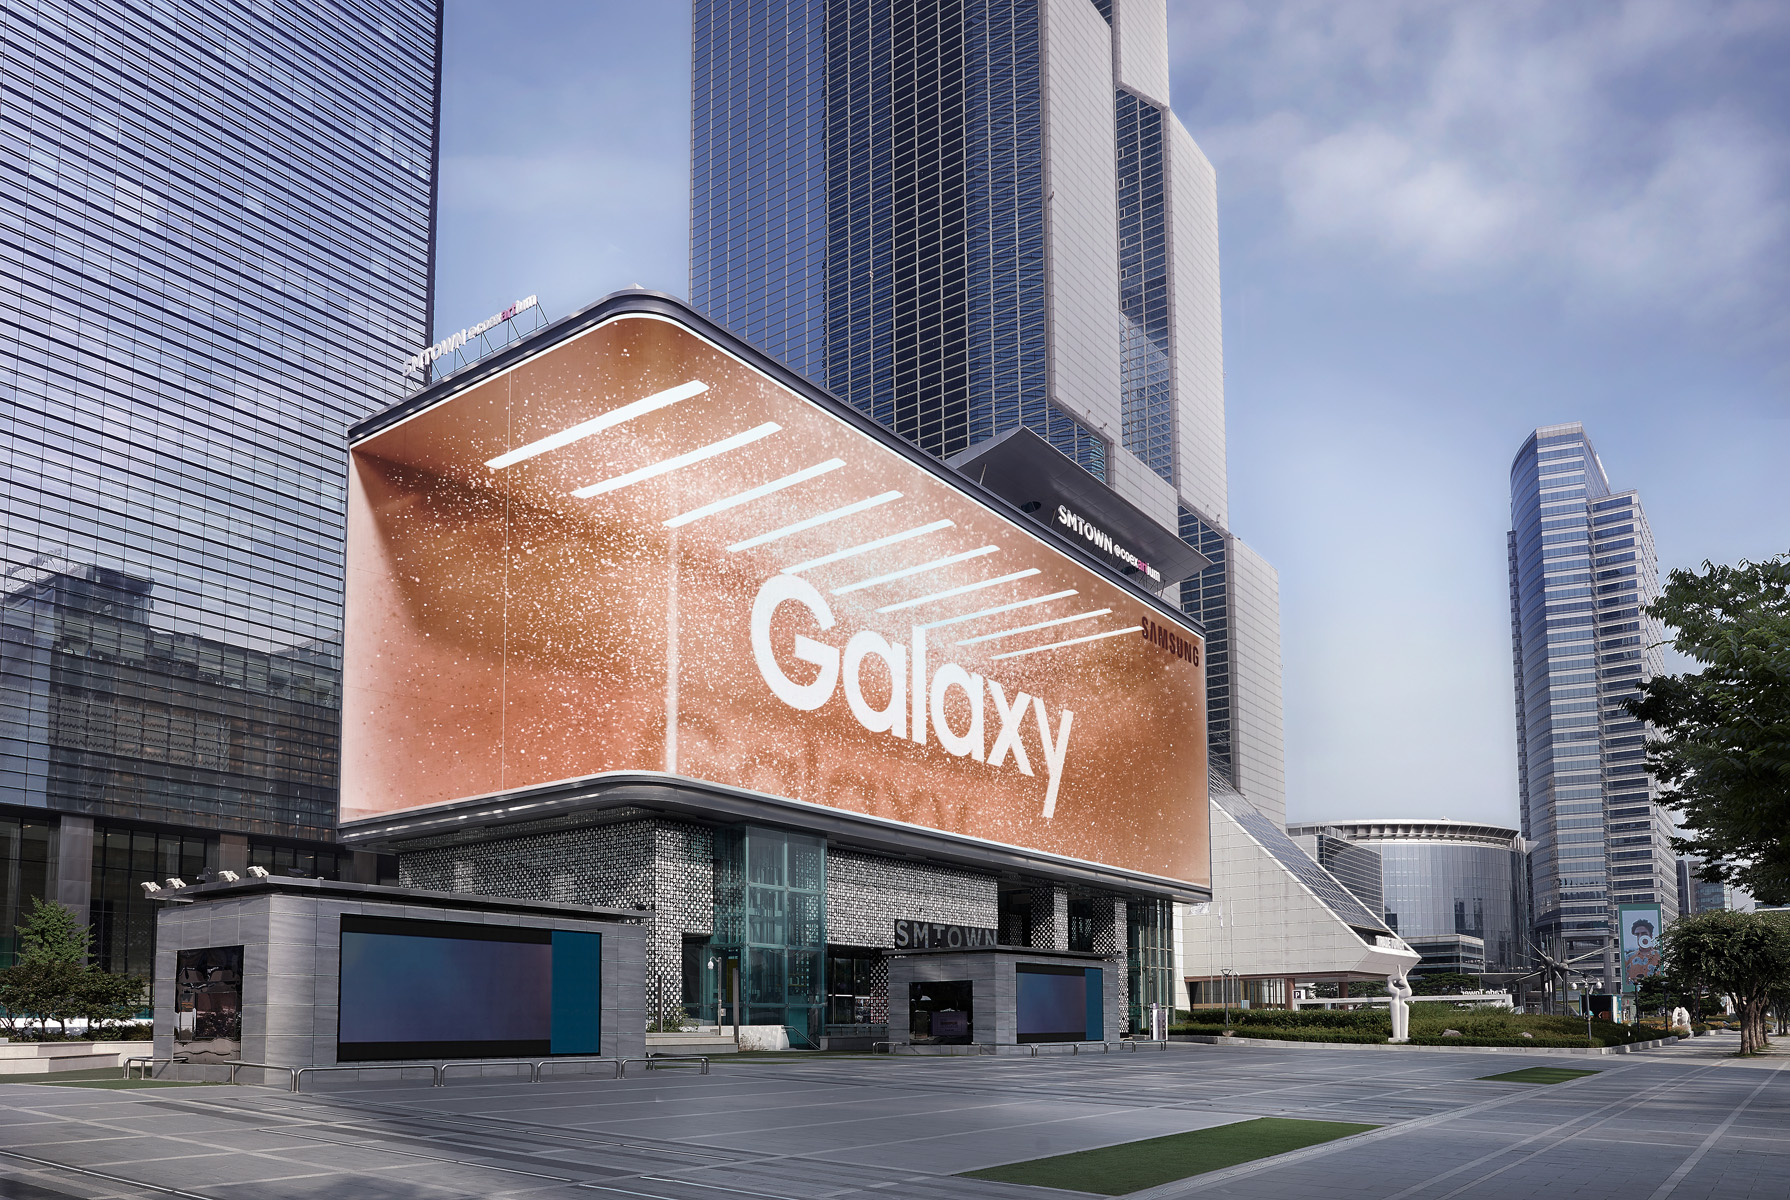 Large digital display with bronze backdrop and white letters spelling out the word Galaxy